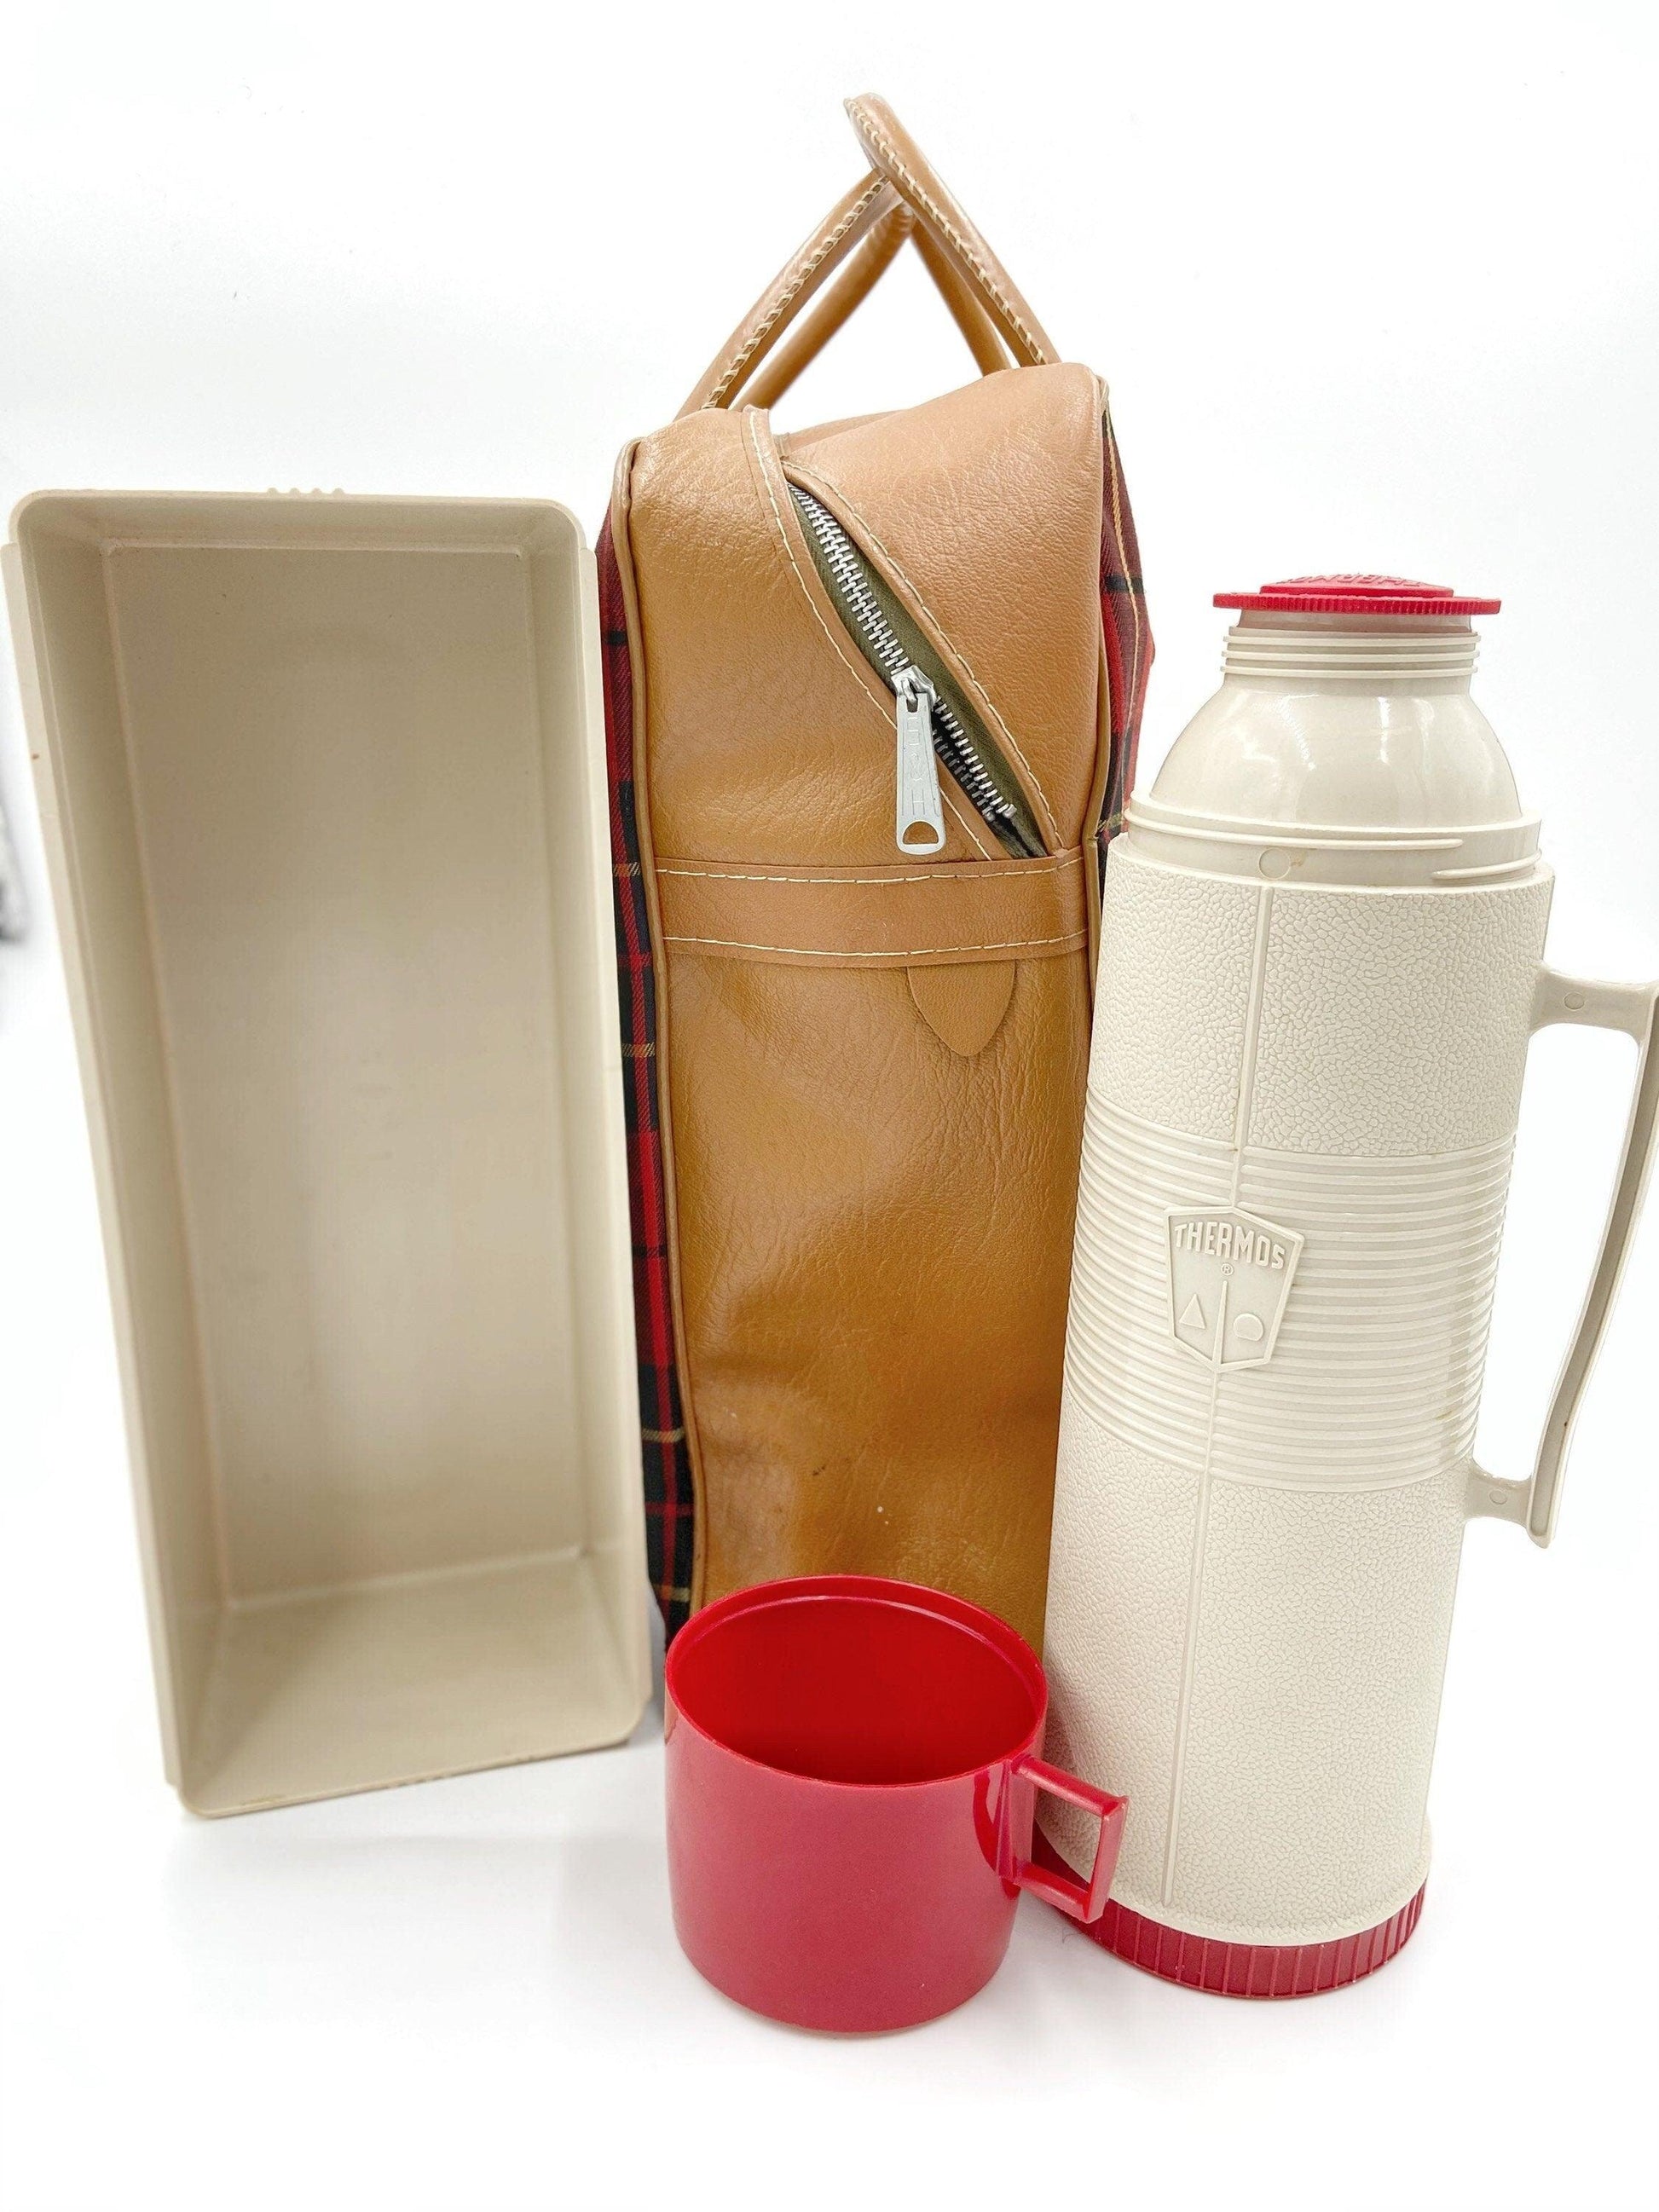 https://funkyhousevintage.com/cdn/shop/files/vintage-picnic-set-1970s-thermos-brand-retro-plaid-bag-outdoor-dining-set-located-at-funkyhouse-vintage-antique-store-weiser-idaho-2_5a2fd981-751f-4078-9277-9598ccb9a3c8.jpg?v=1688593063&width=1946